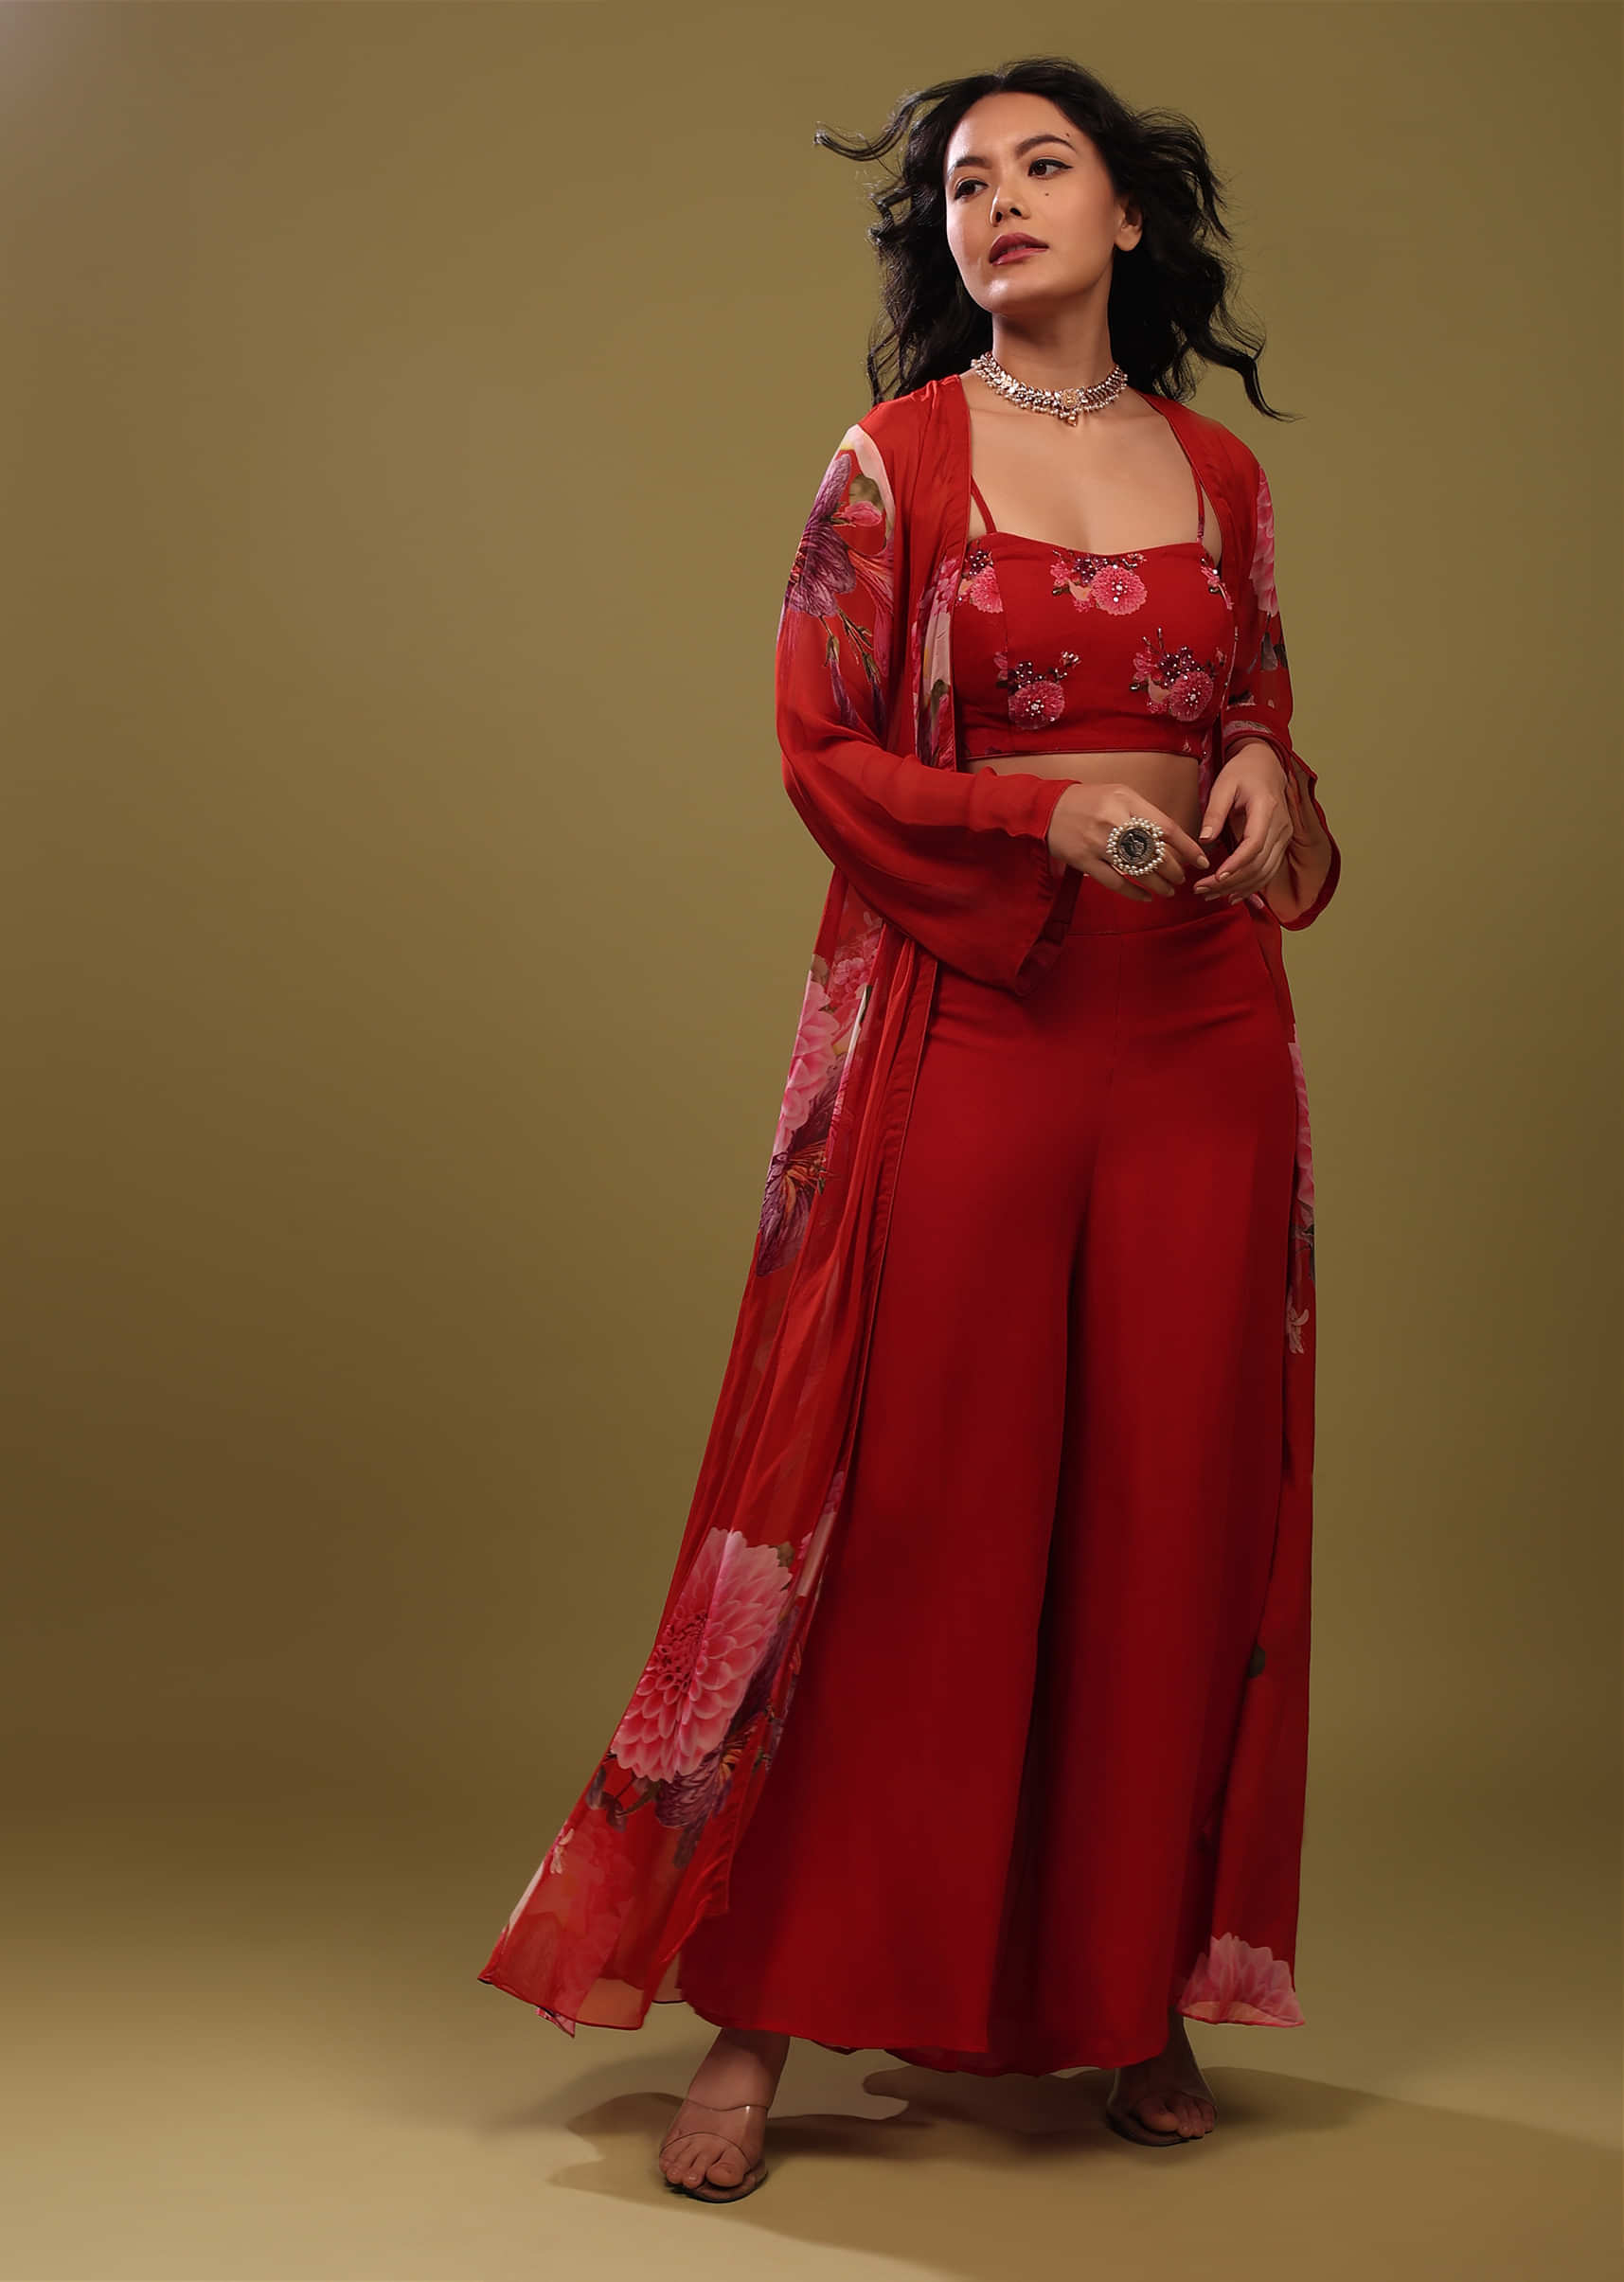 Kalki Molten Lava Red Palazzo Top Set With Shrug In A Breezy Floral Print And Embroidery